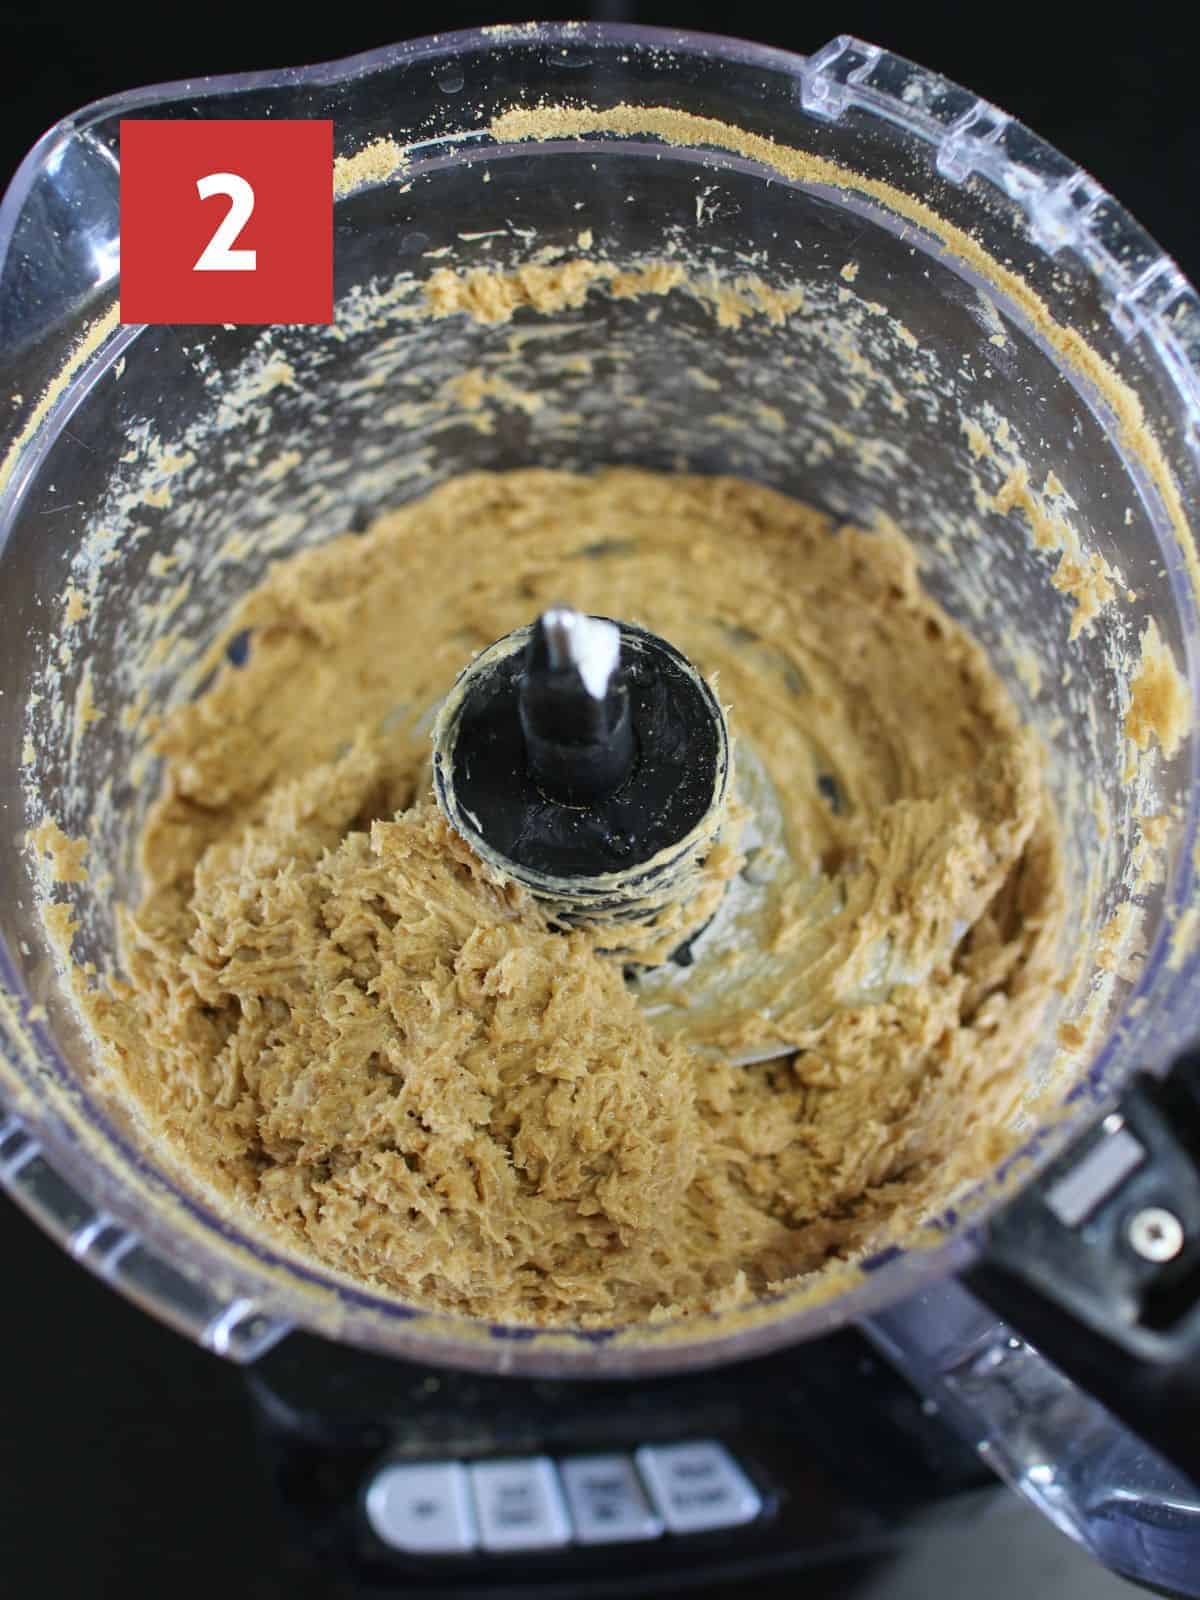 A large food processor with ground ginger snap cookies and cream cheese with top removed on a black table.  In the upper left corner is a dark red square and a white '2' in the center.